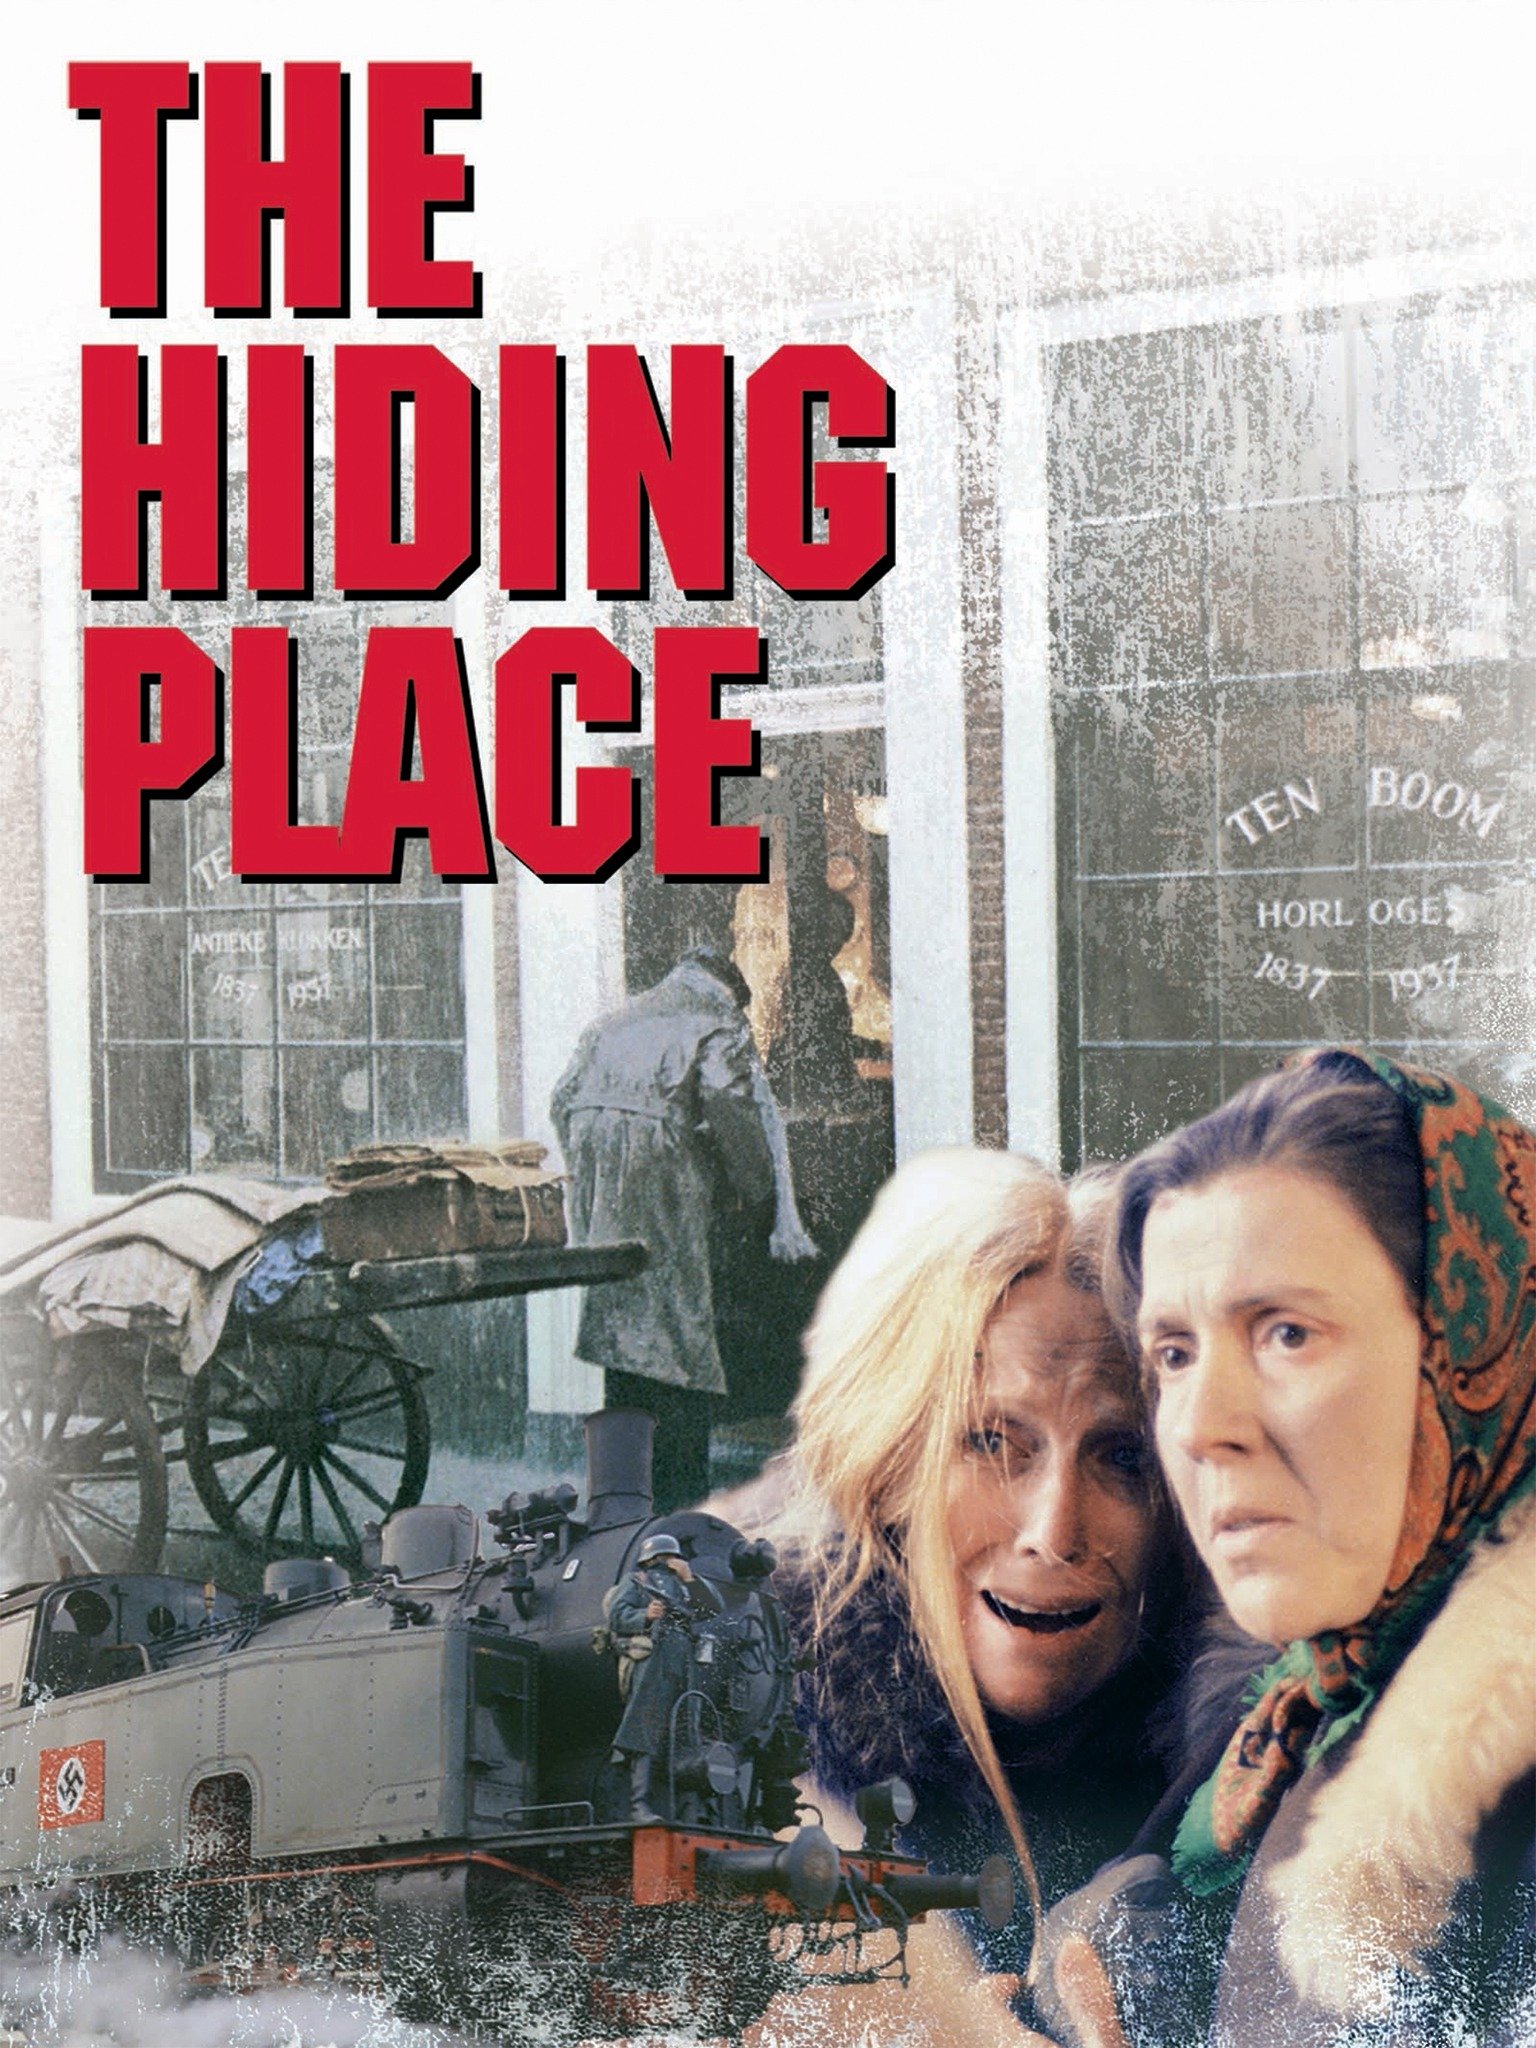 40 Top Images The Hiding Place Movie Amazon / Amazon Com War Of